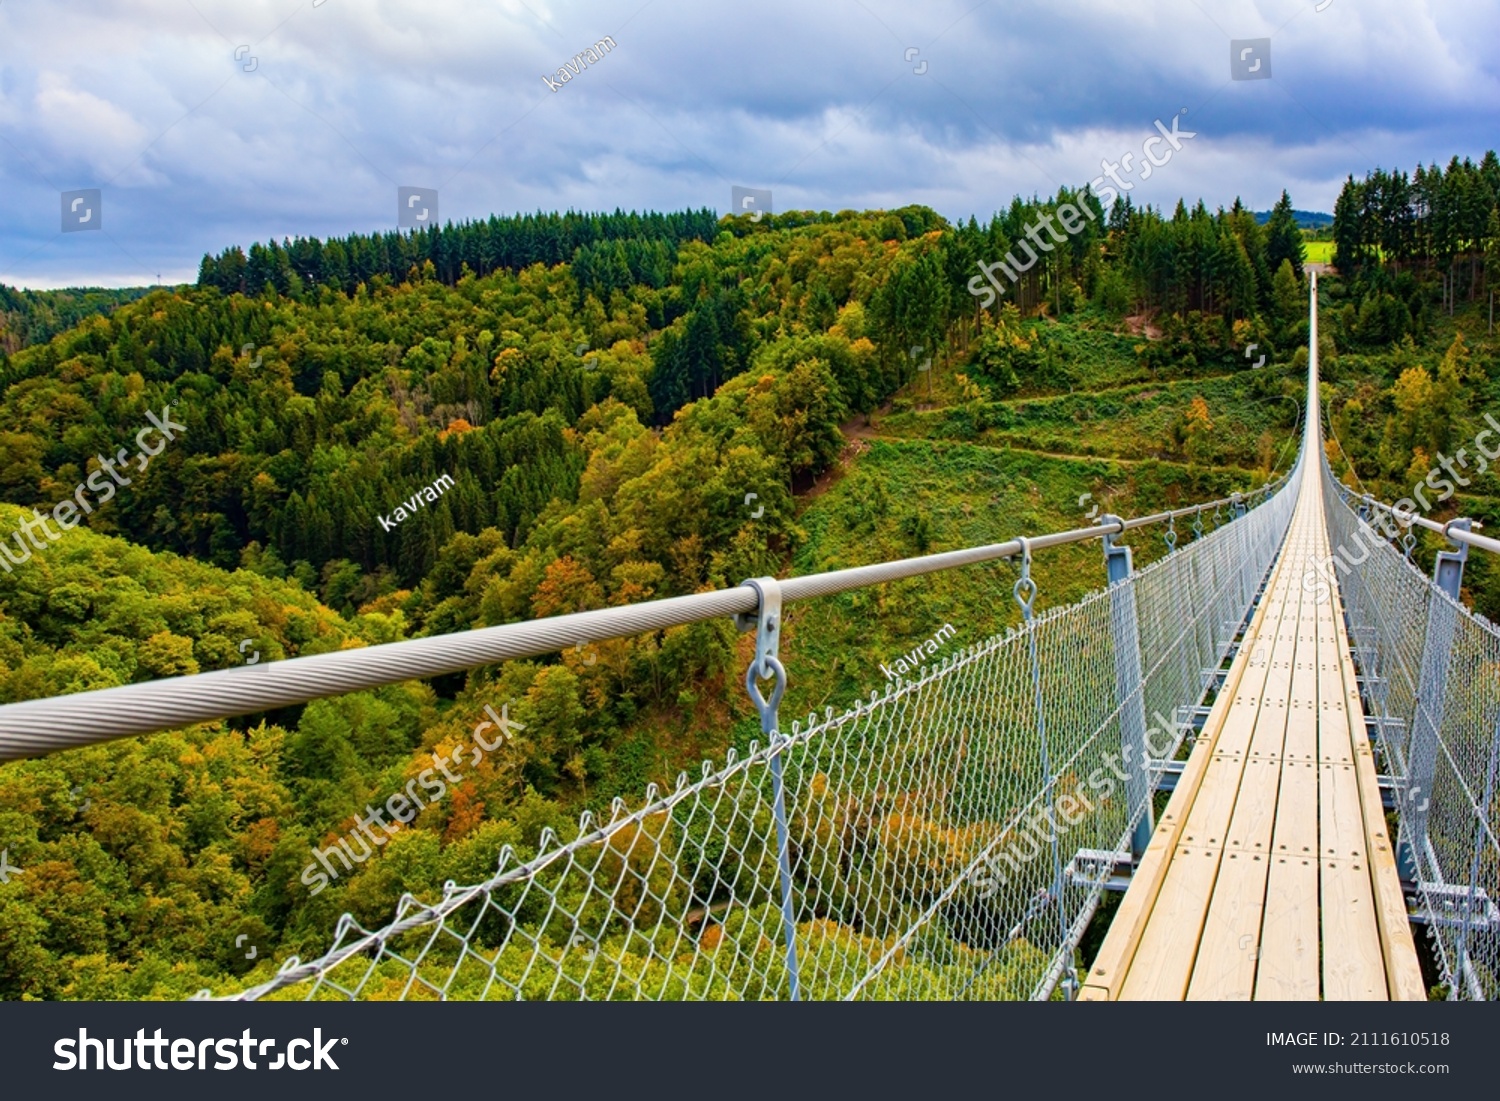 Geierlay- cableway suspension bridge in Germany. Hunsrück region in Rhineland-Palatinate. Picturesque bridge over the valley of the Mersdorf stream. Windy and cold autumn day #2111610518